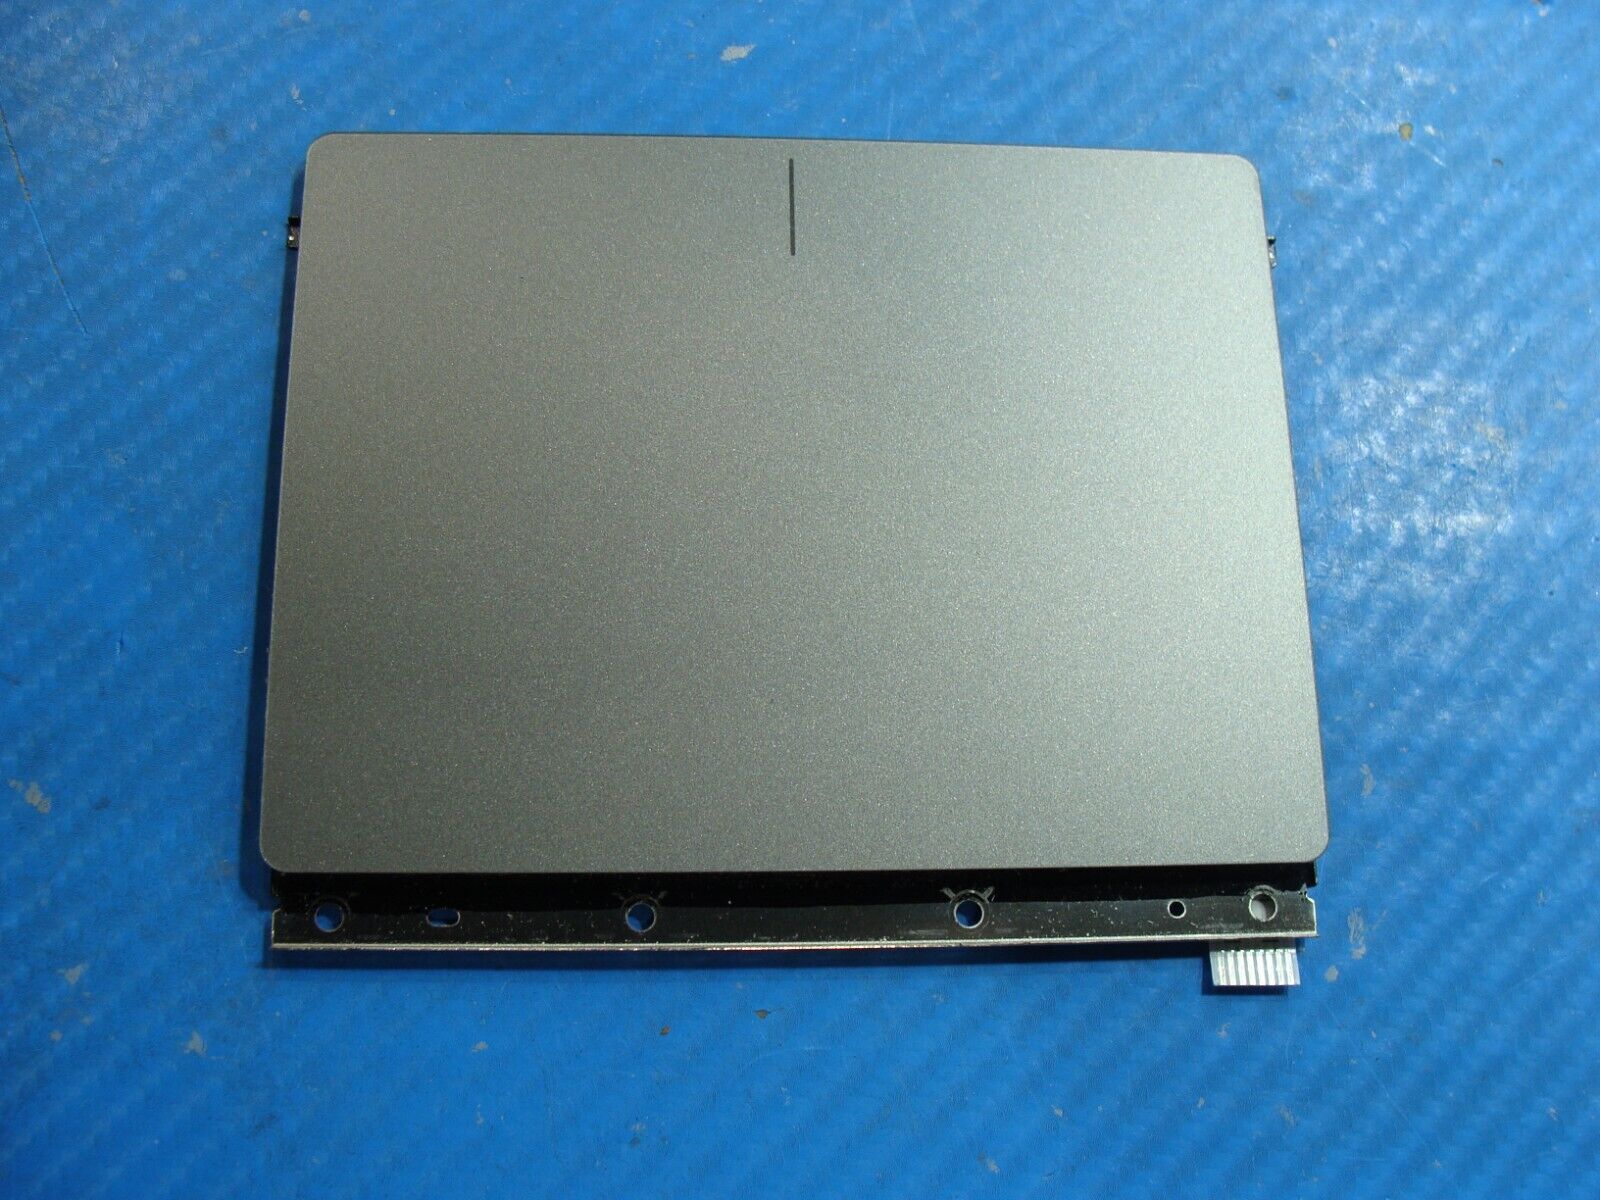 Dell Inspiron 15.6” 15 5567 OEM TouchPad w/Cable 920-003235-01 TM-P3240-001